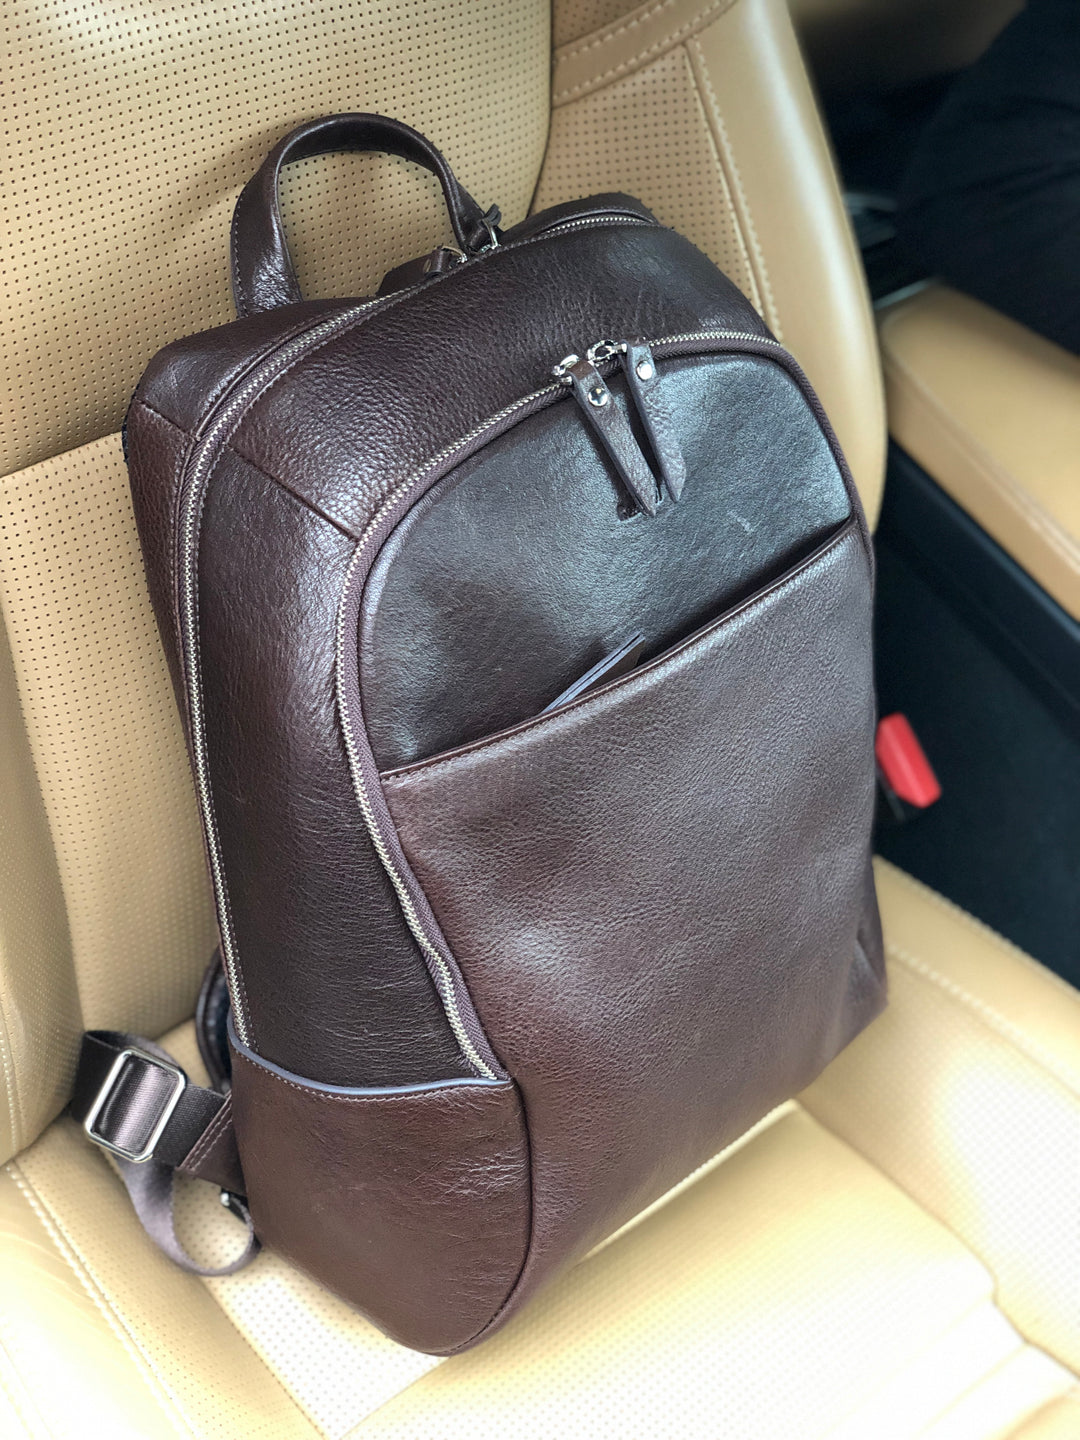 Voyager Leather Backpack - Brown